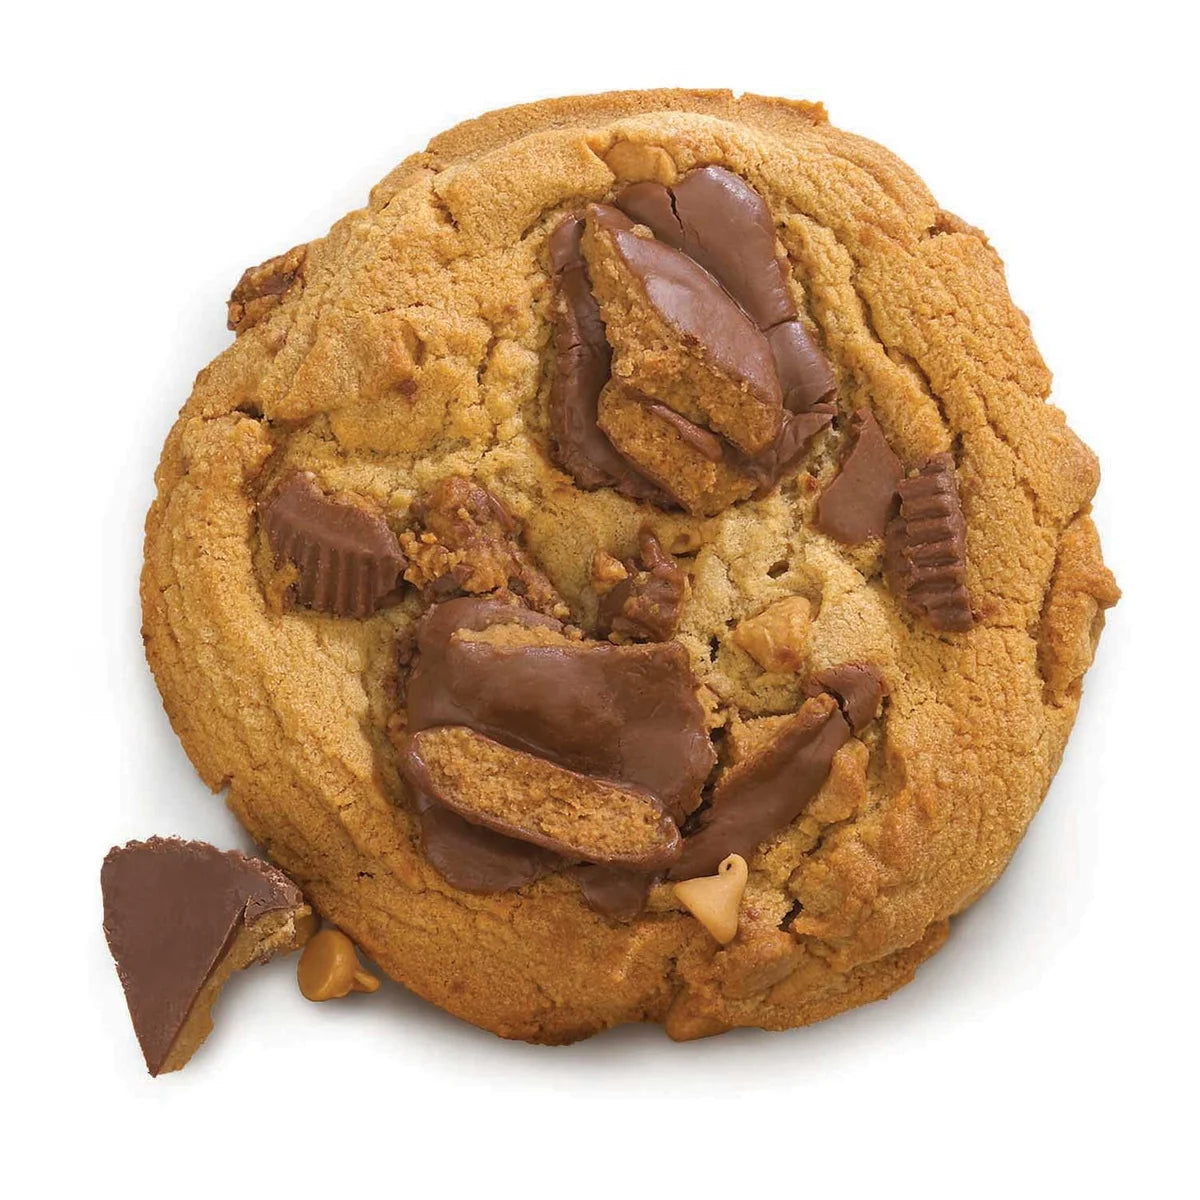 Resses Peanut Butter Chocolate Cookie 4.5 oz